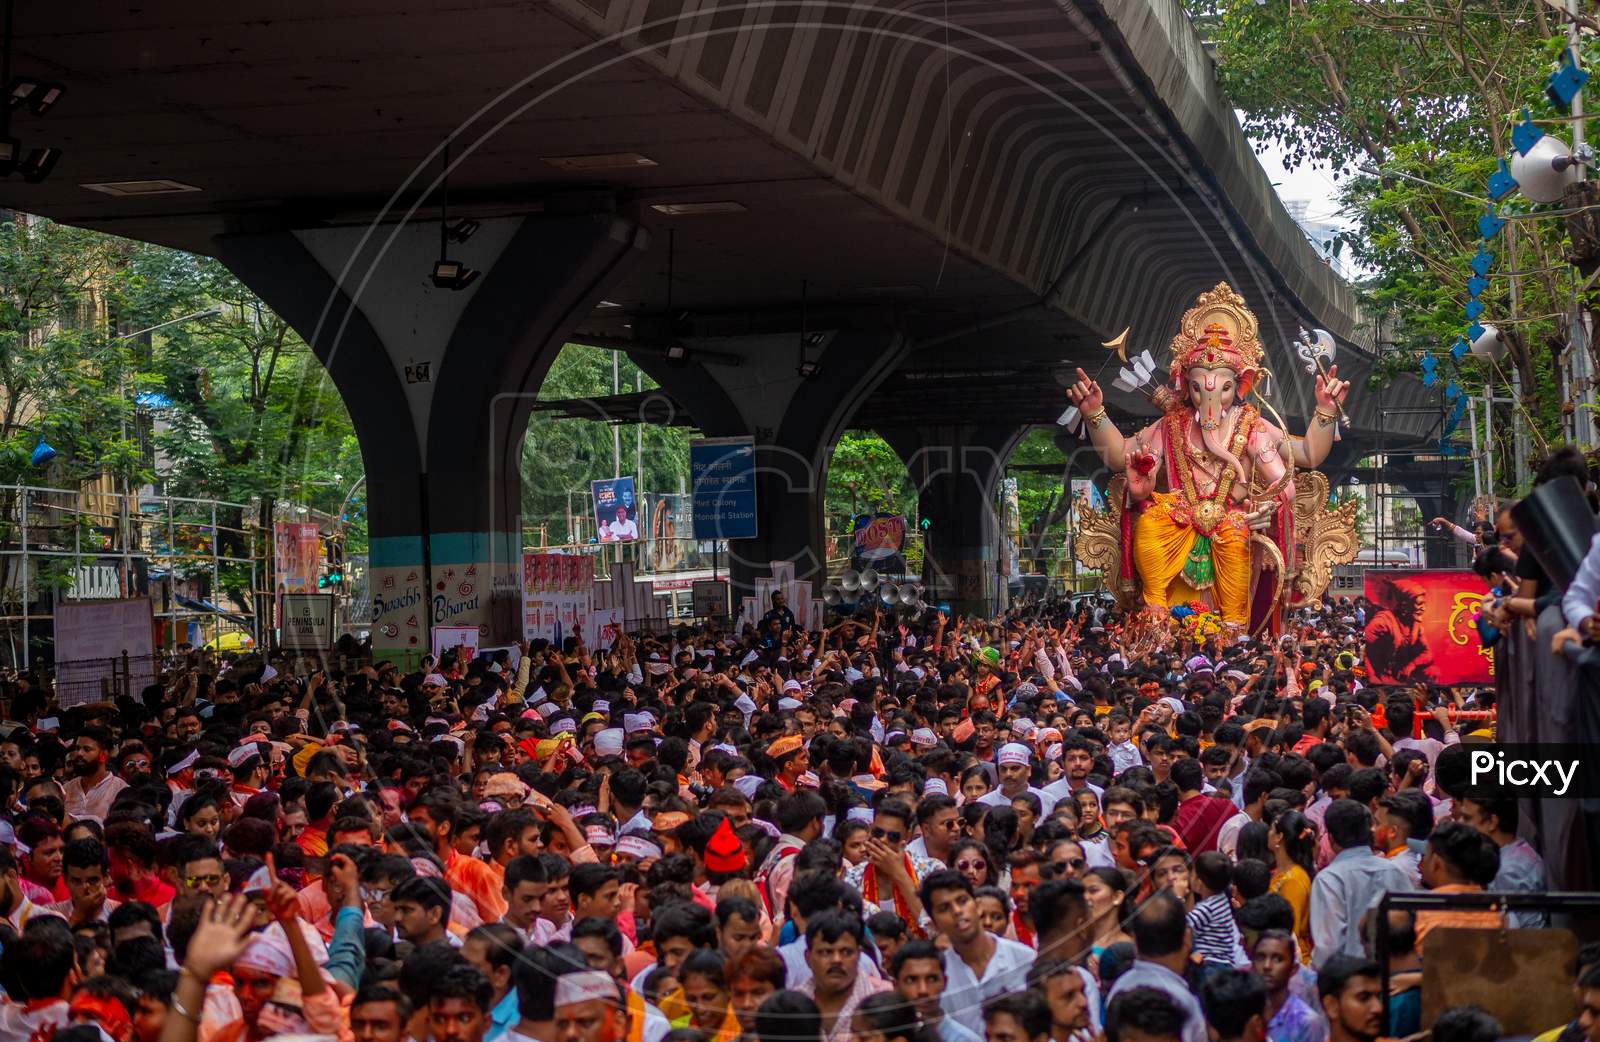 Thousands Of Devotees Bid Adieu To Tallest Lord Ganesha In Mumbai During Ganesh Visarjan Which Marks The End Of The Ten-Day-Long Ganesh Chaturthi Festival.